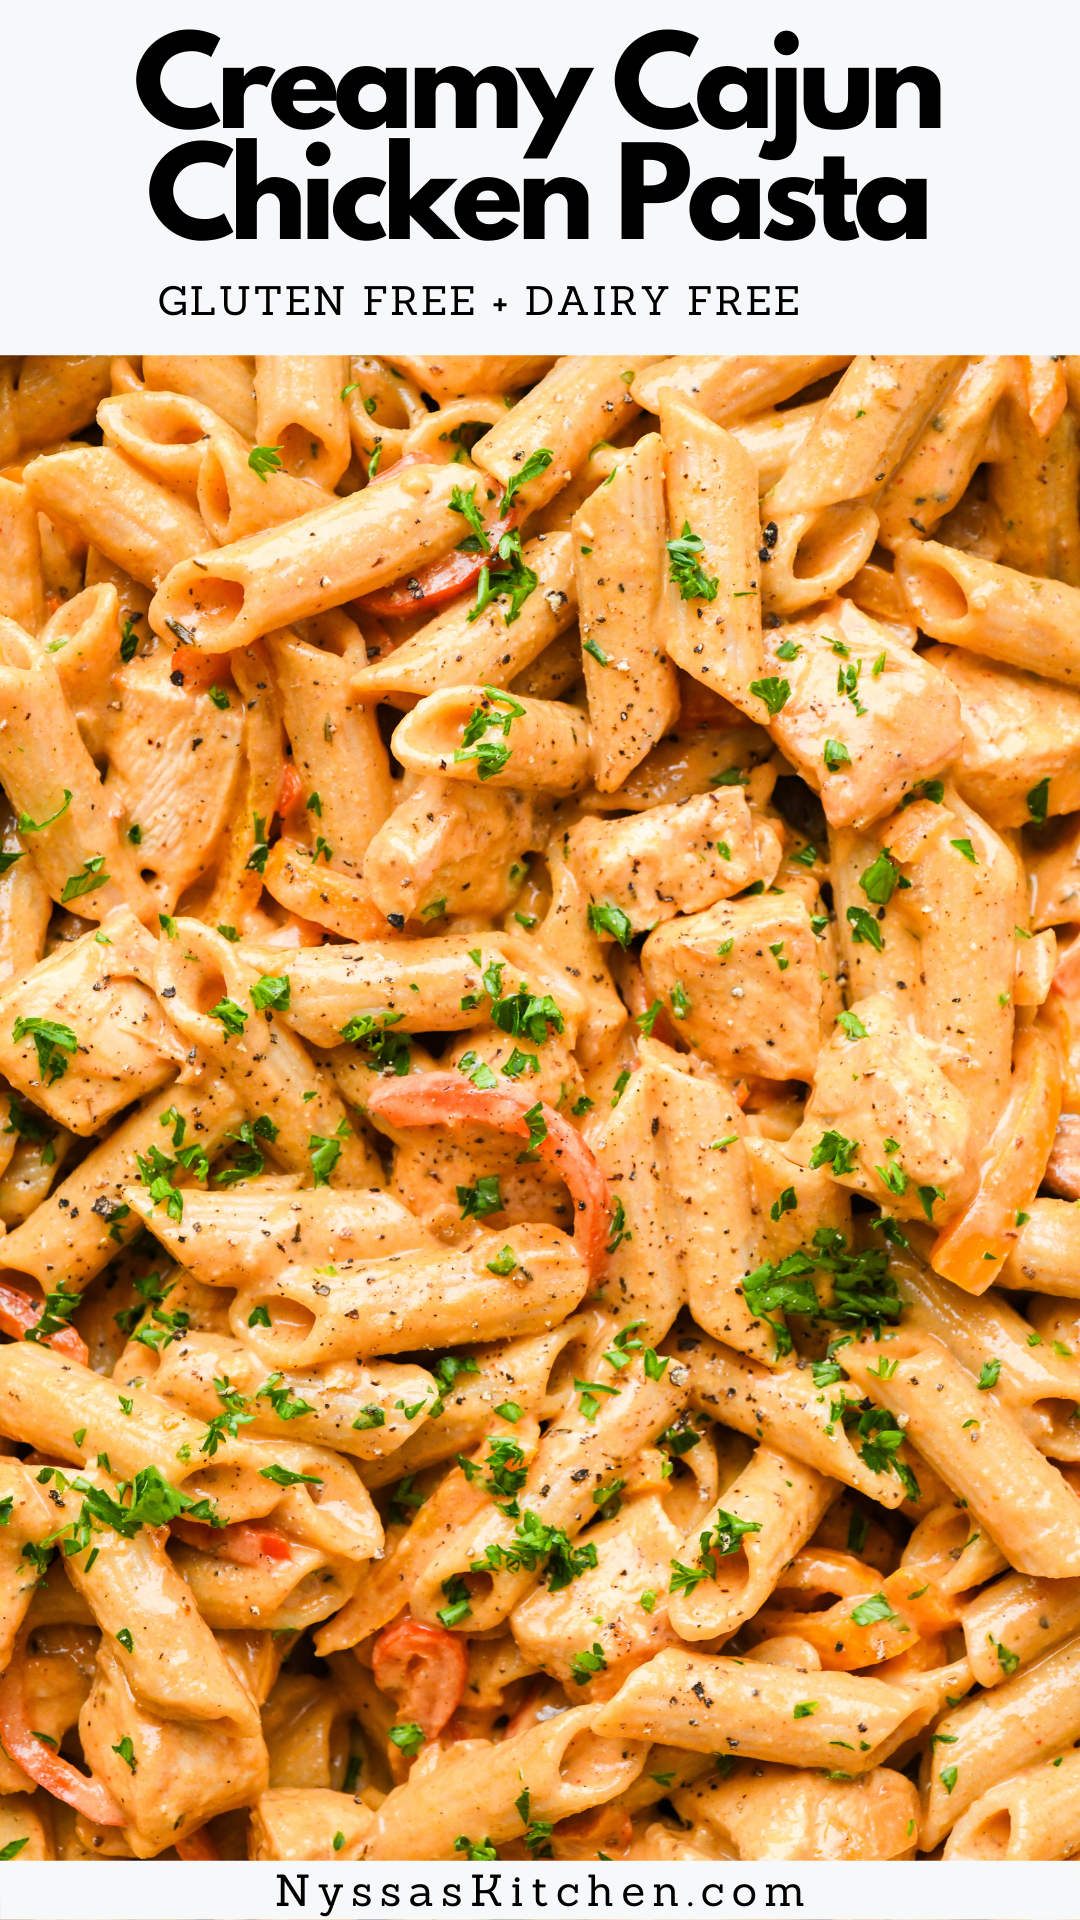 Dairy free and gluten free, this creamy cajun chicken pasta is a lightened up version of a comfort food classic! A cozy recipe that's perfect for any night of the week that's healthy and full of zesty Cajun flavor. Gluten free, dairy free, vegan option.